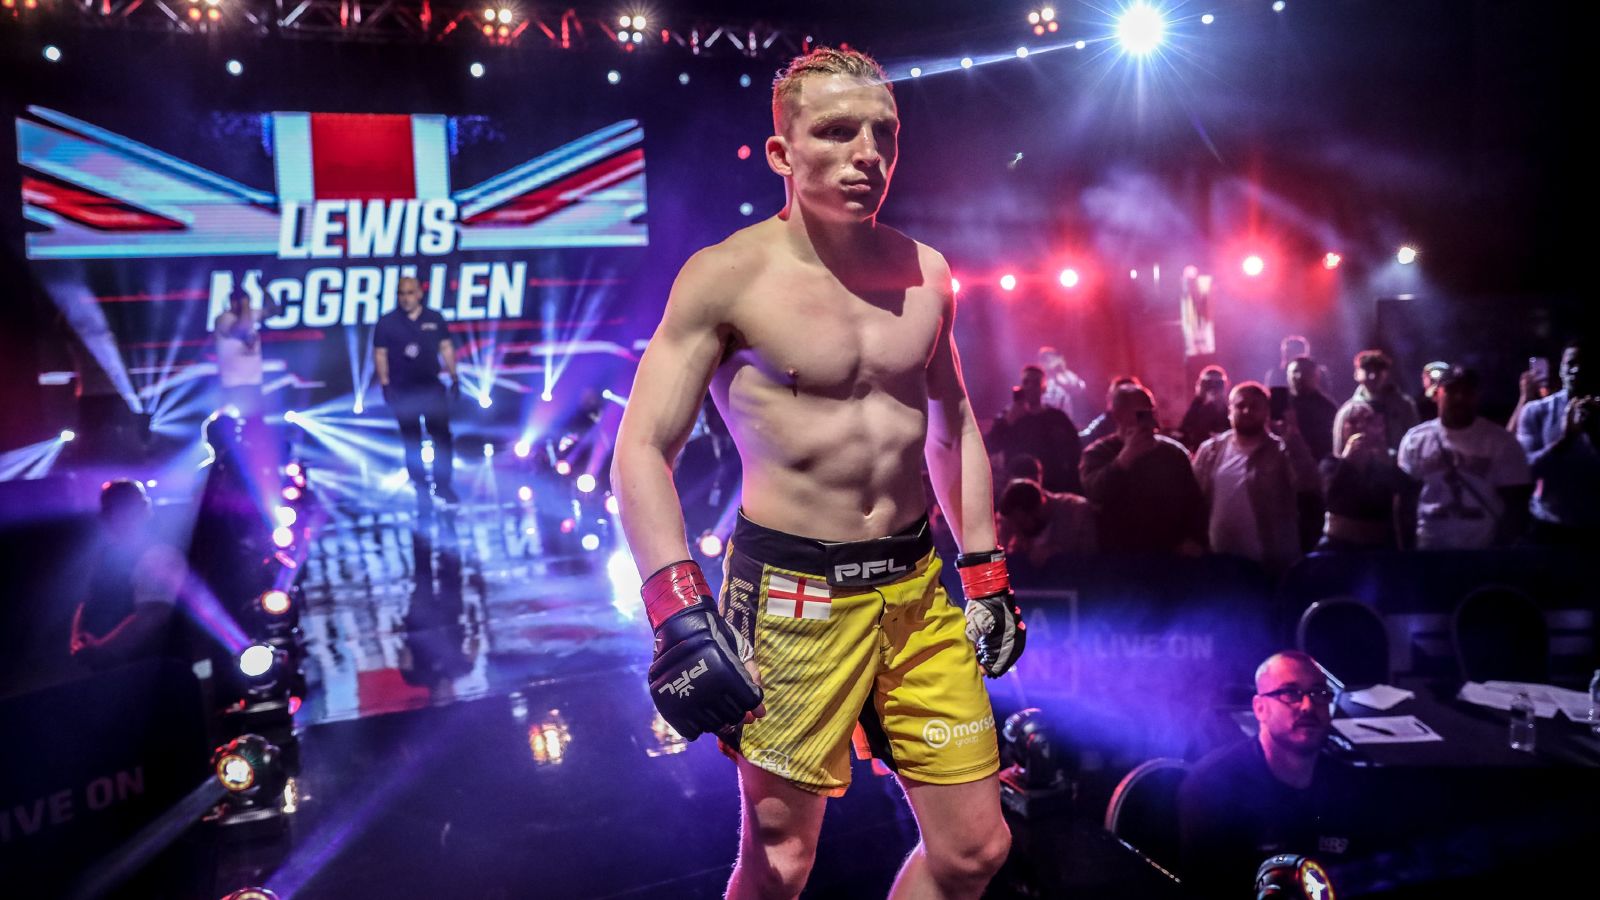 PFL Snatch Up Sizzling Prospect In Lewis McGrillen On Multi-Fight Deal